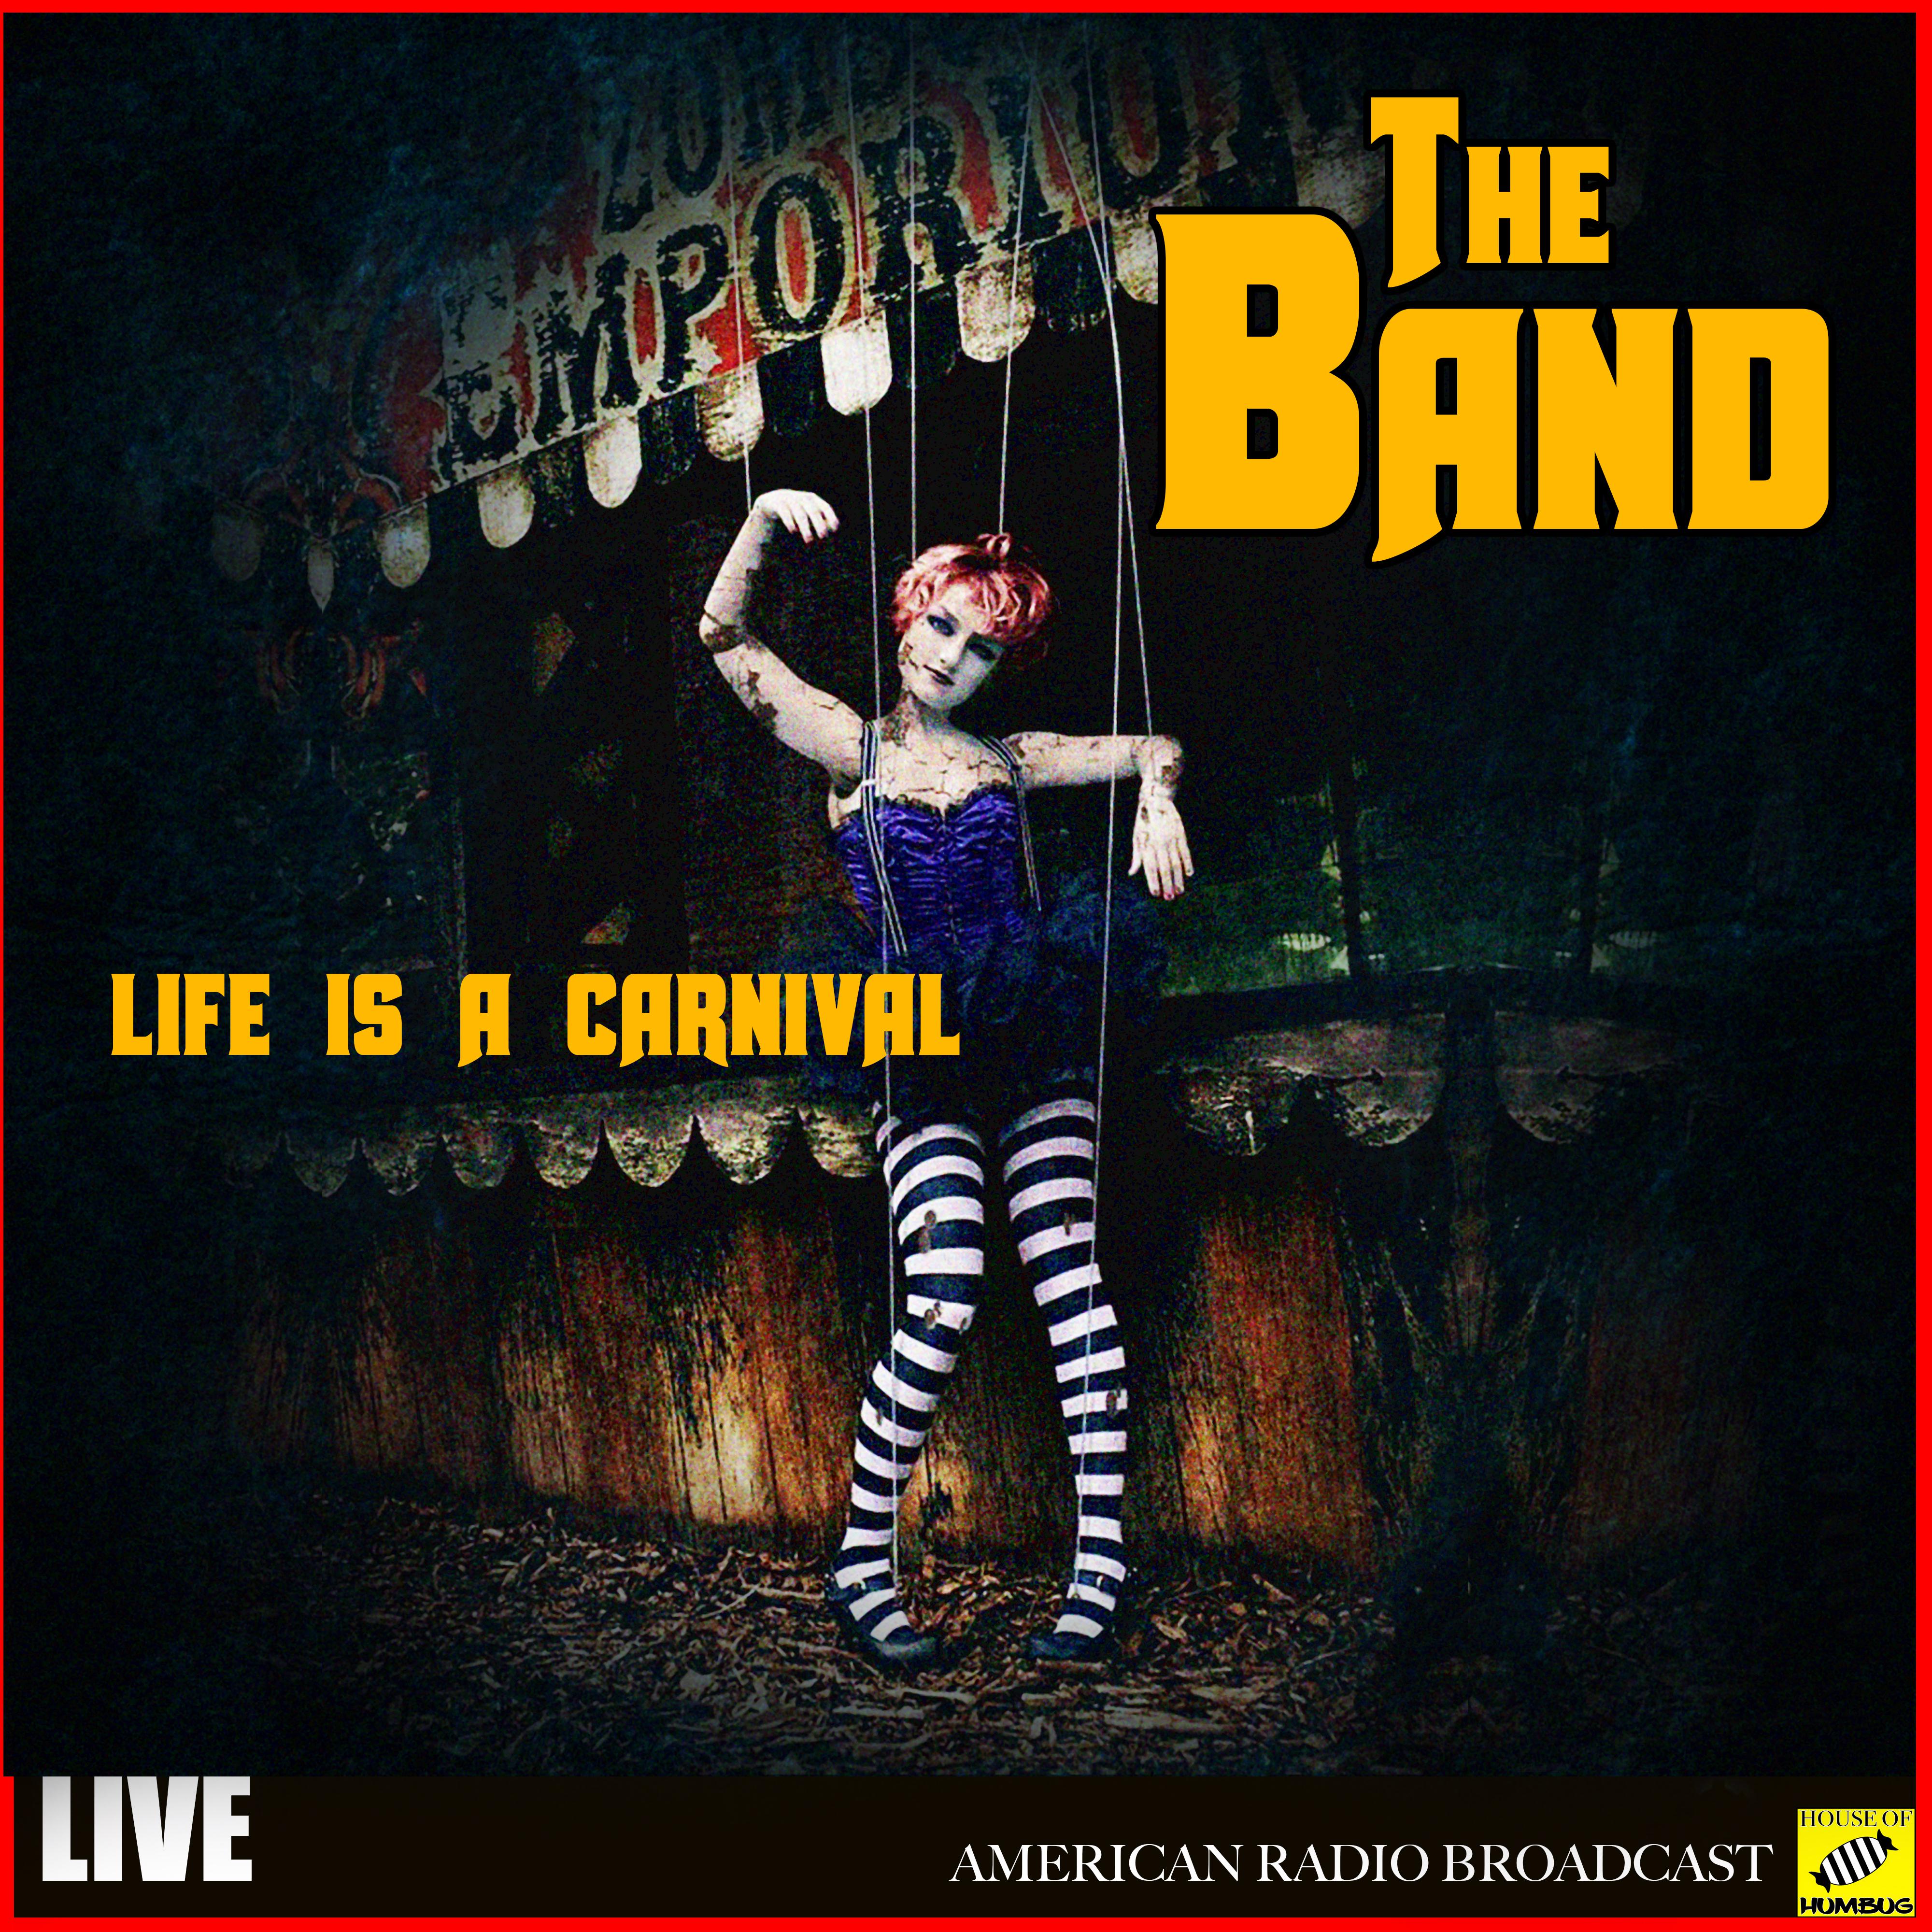 The Band - Life is a Carnival (Live)